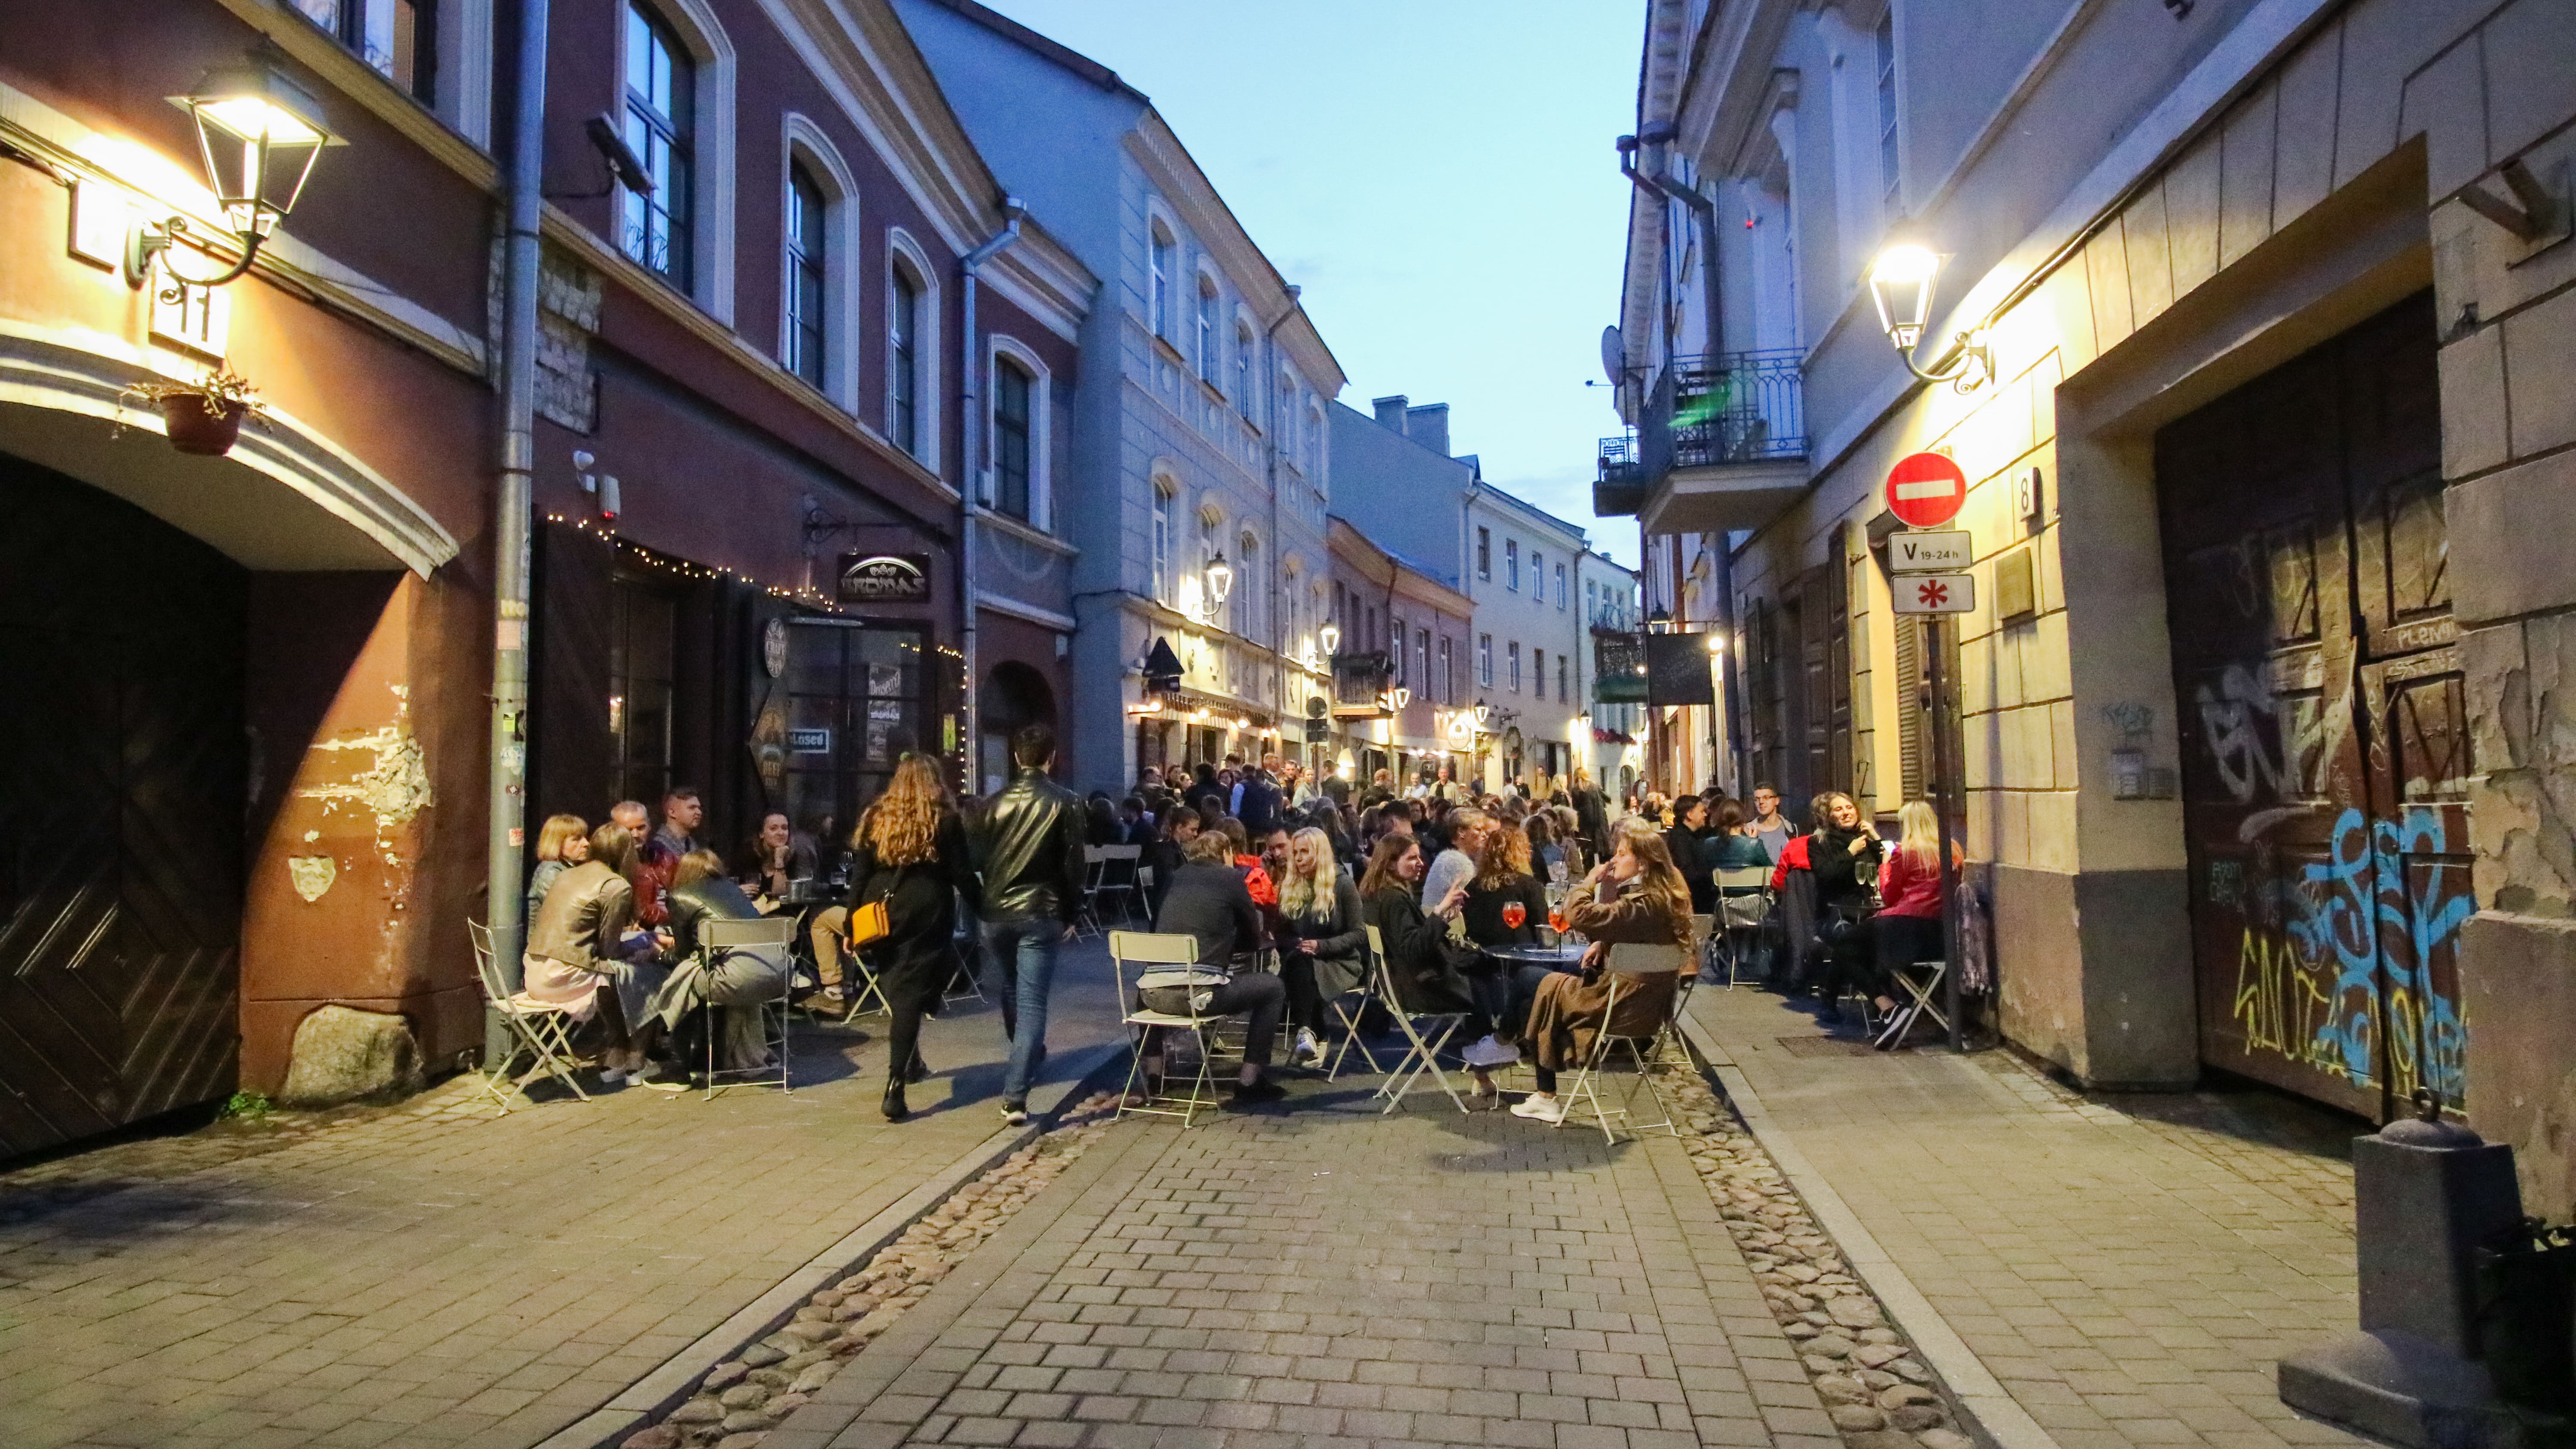 LOCAL & STREET FOOD COMBINED WITH AN EVENING DRINK IN VILNIUS